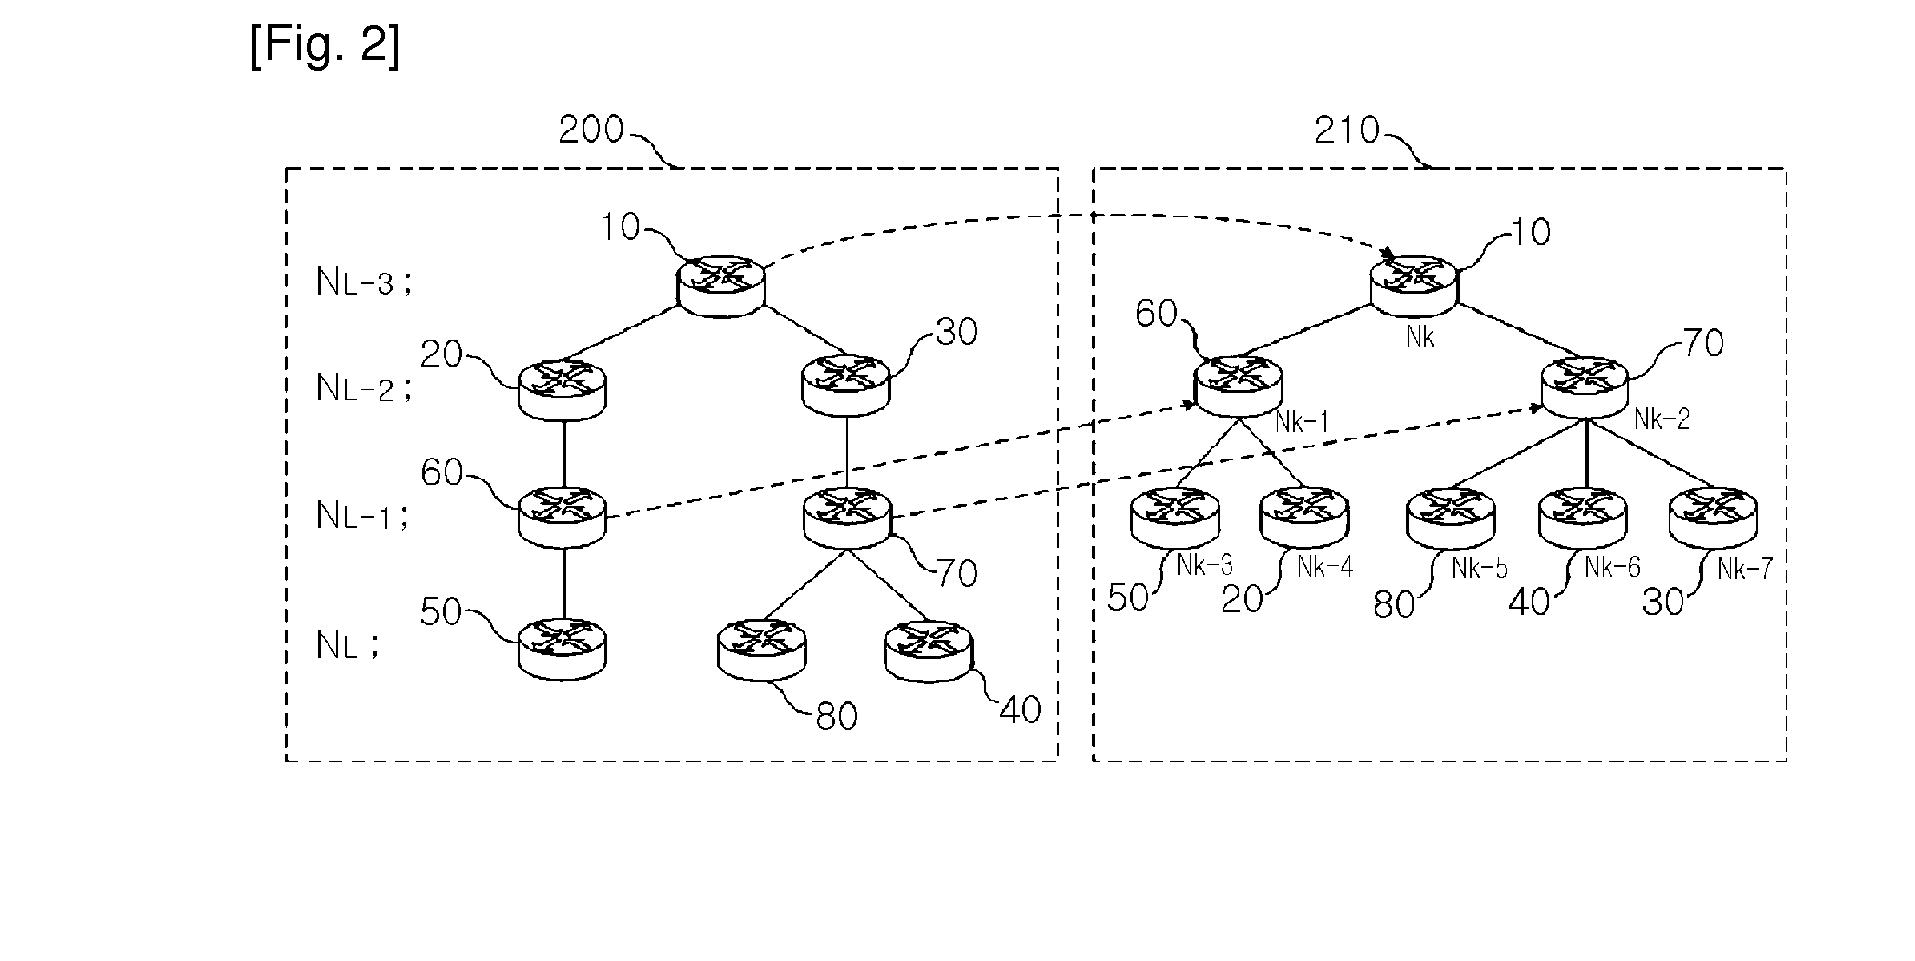 Log-based traceback system and method using centroid decomposition technique